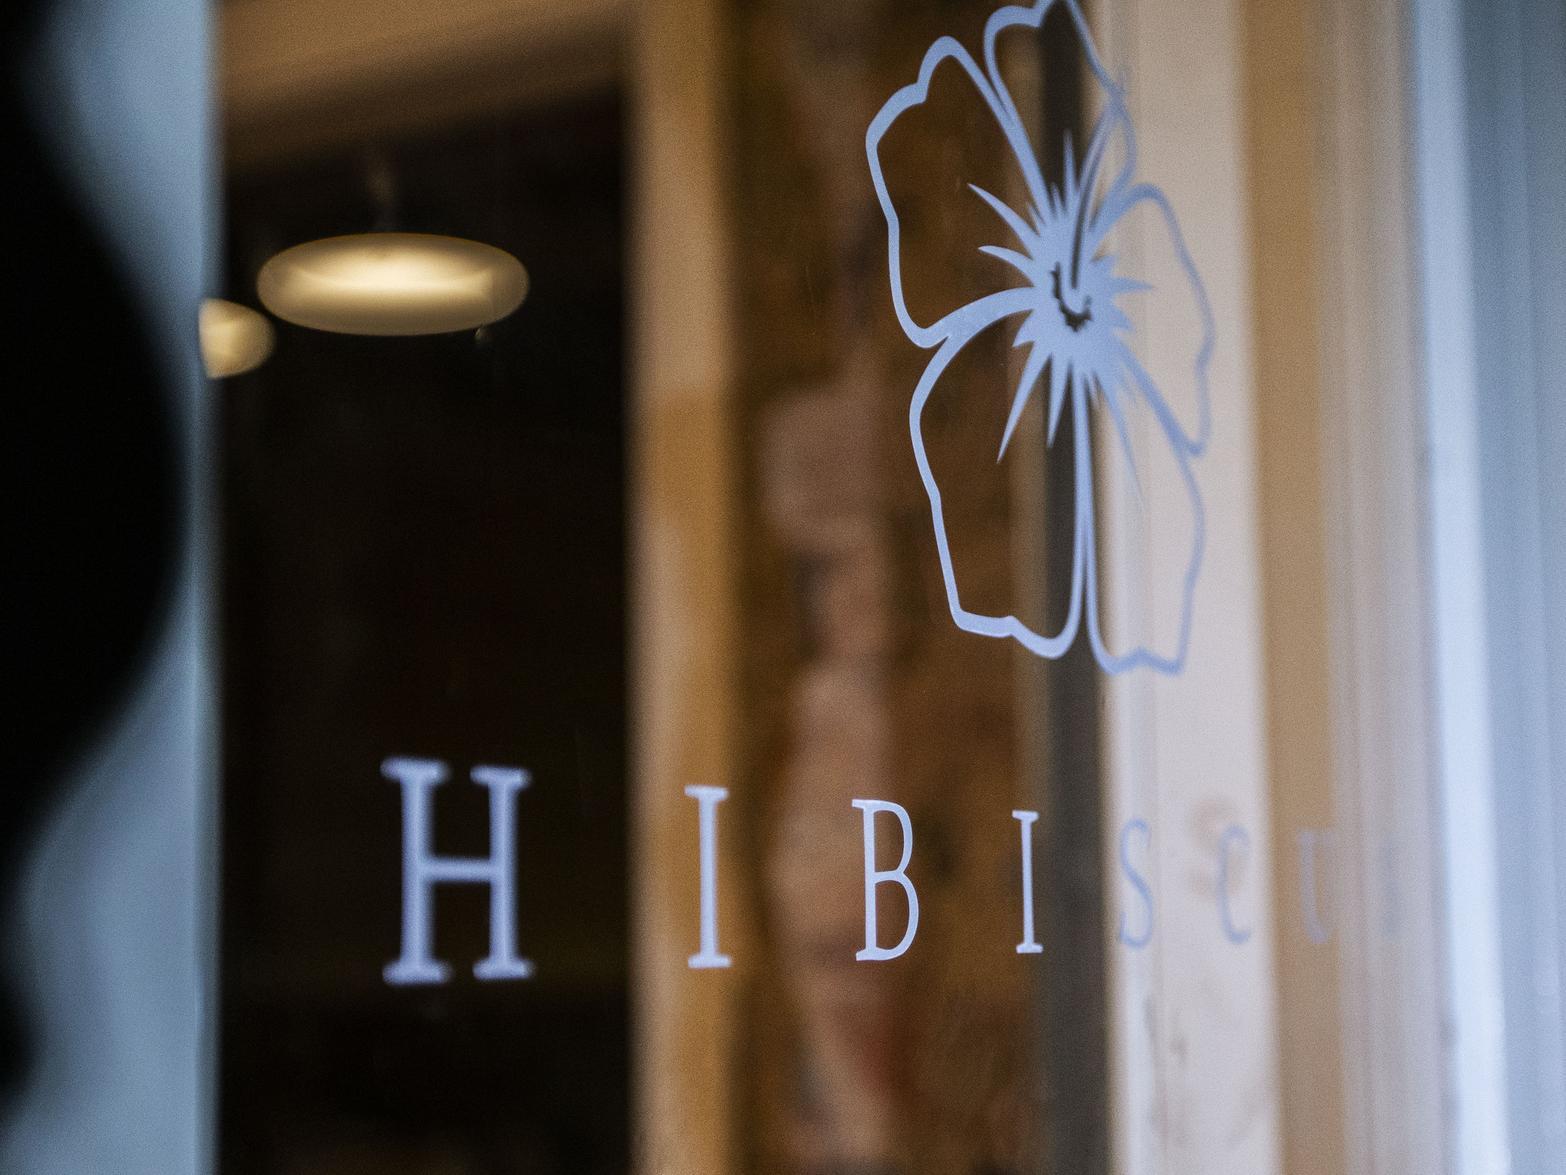 Hibiscus, which has recently moved to Delapre Abbey, made it onto the list. Photo: Kirsty Edmonds.